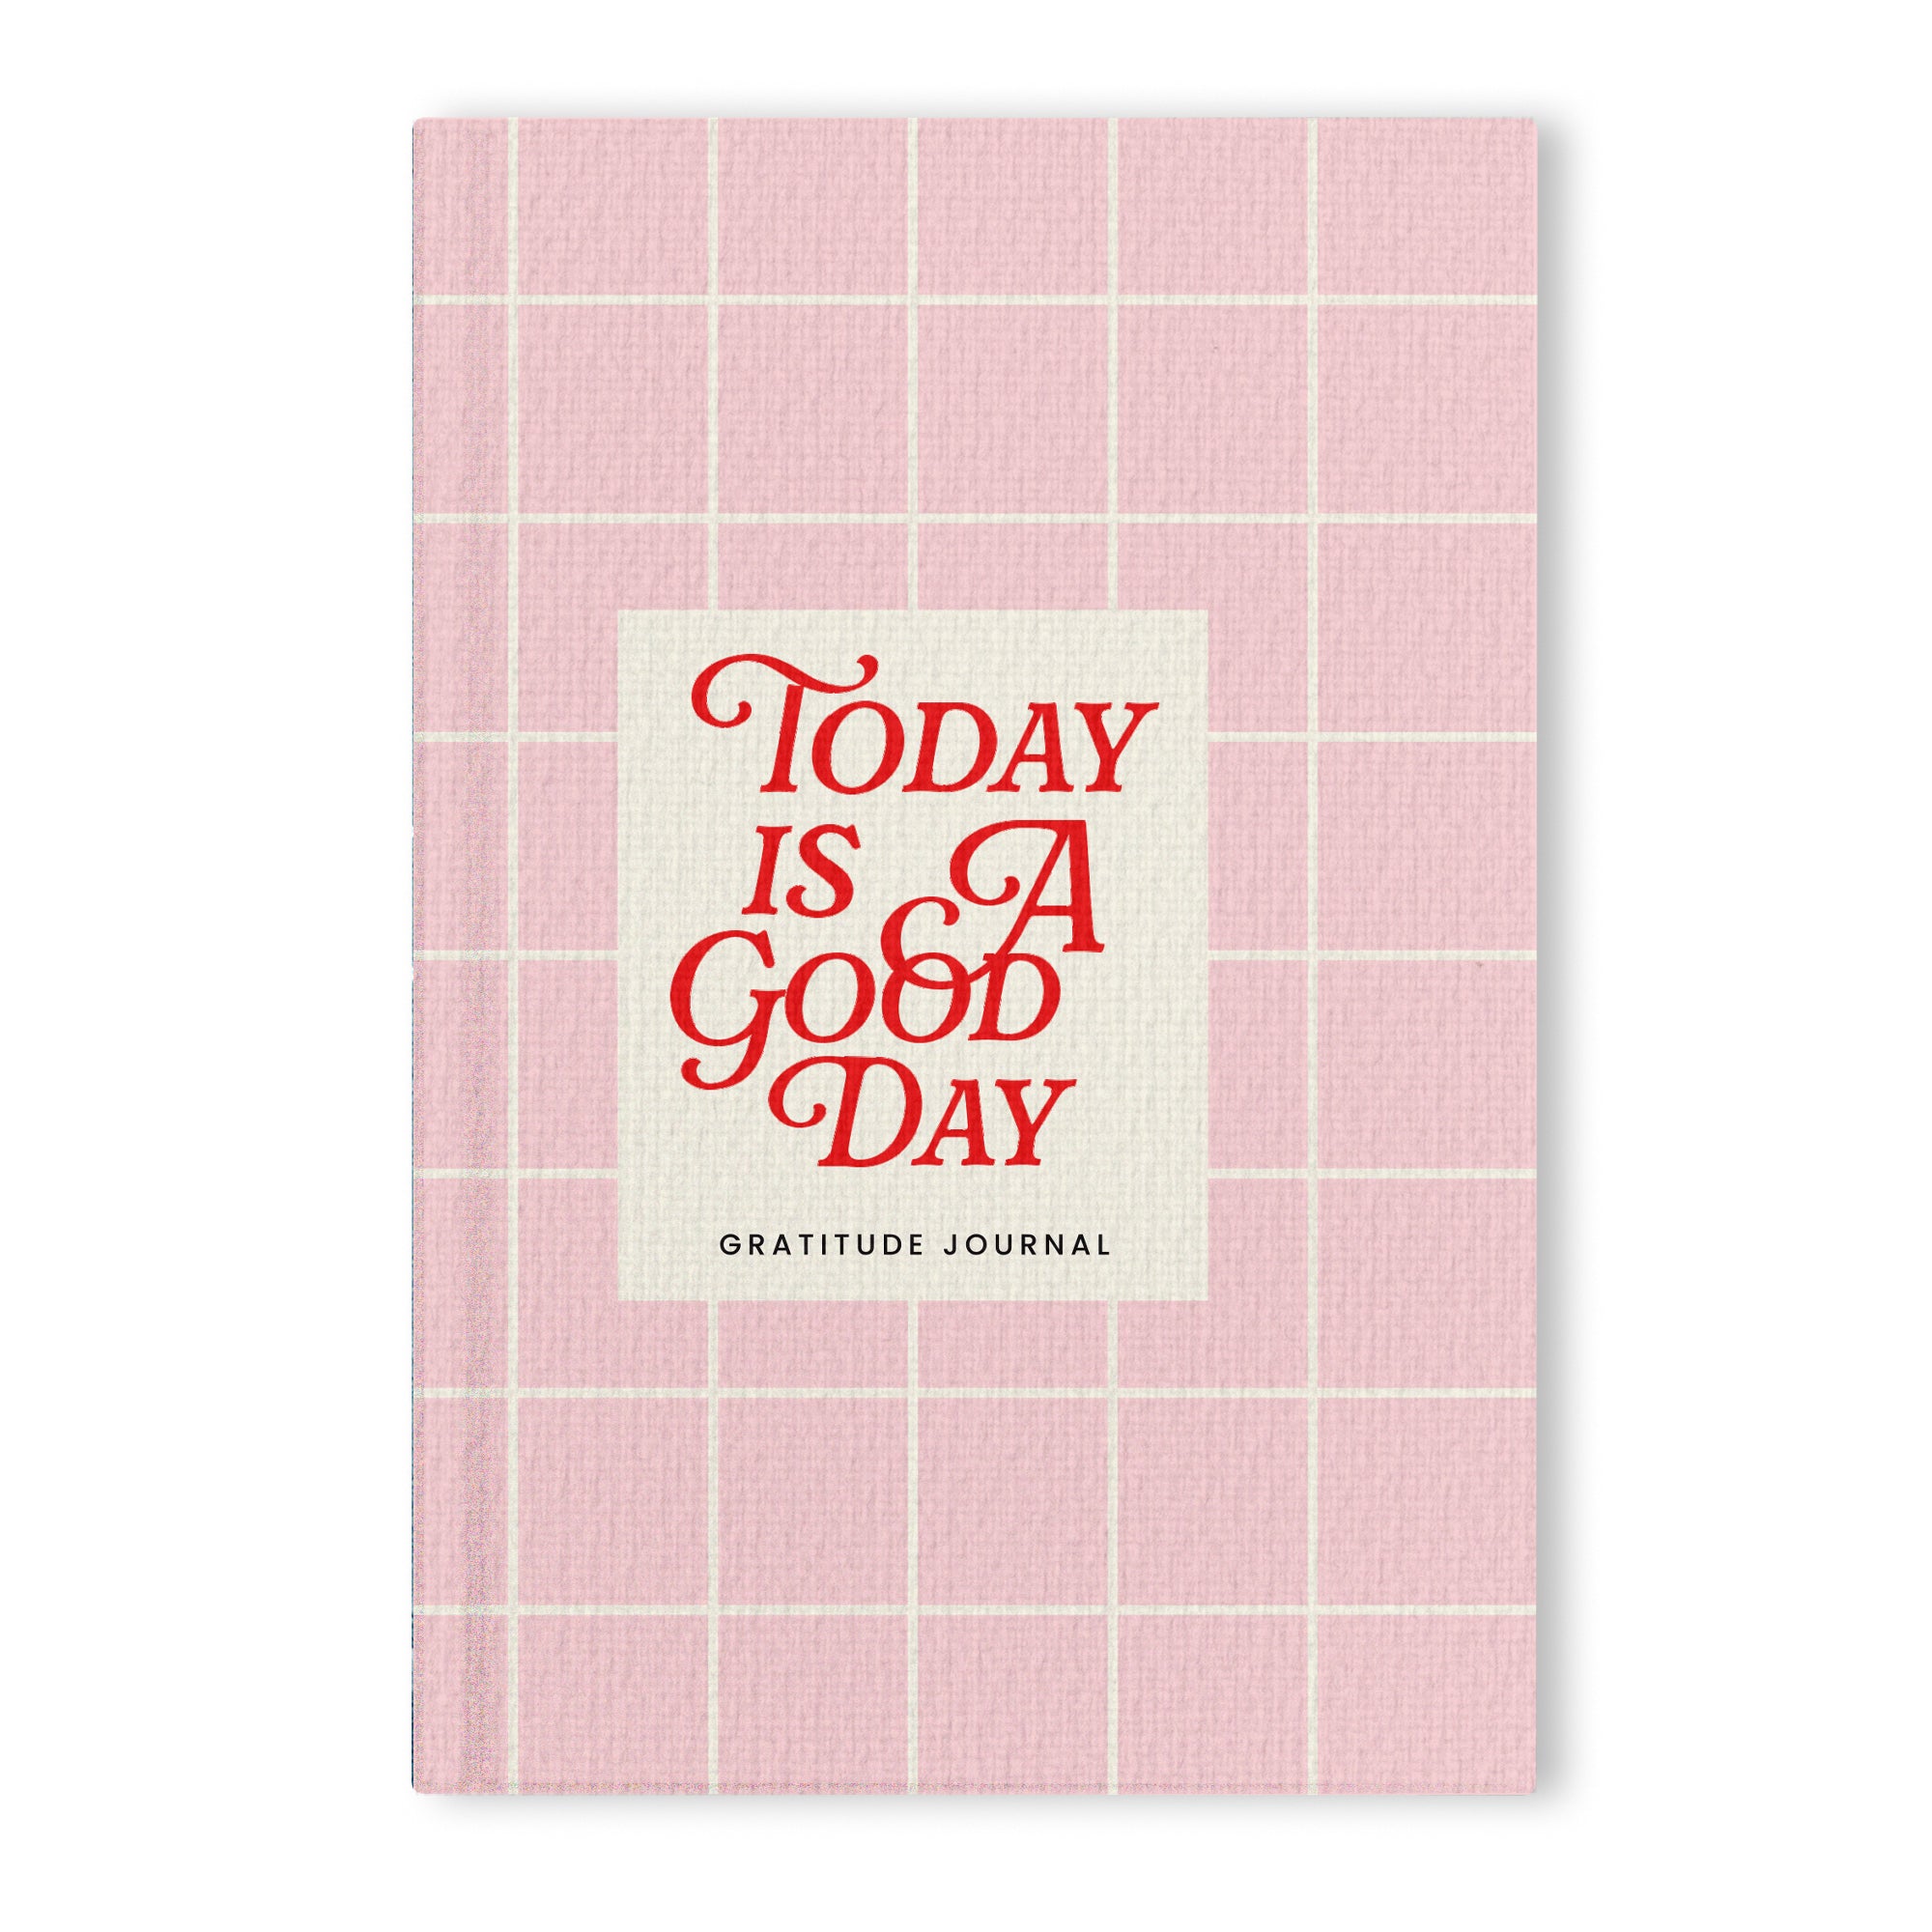 Gratitude Journal A Good Day A6 196Pages Ib